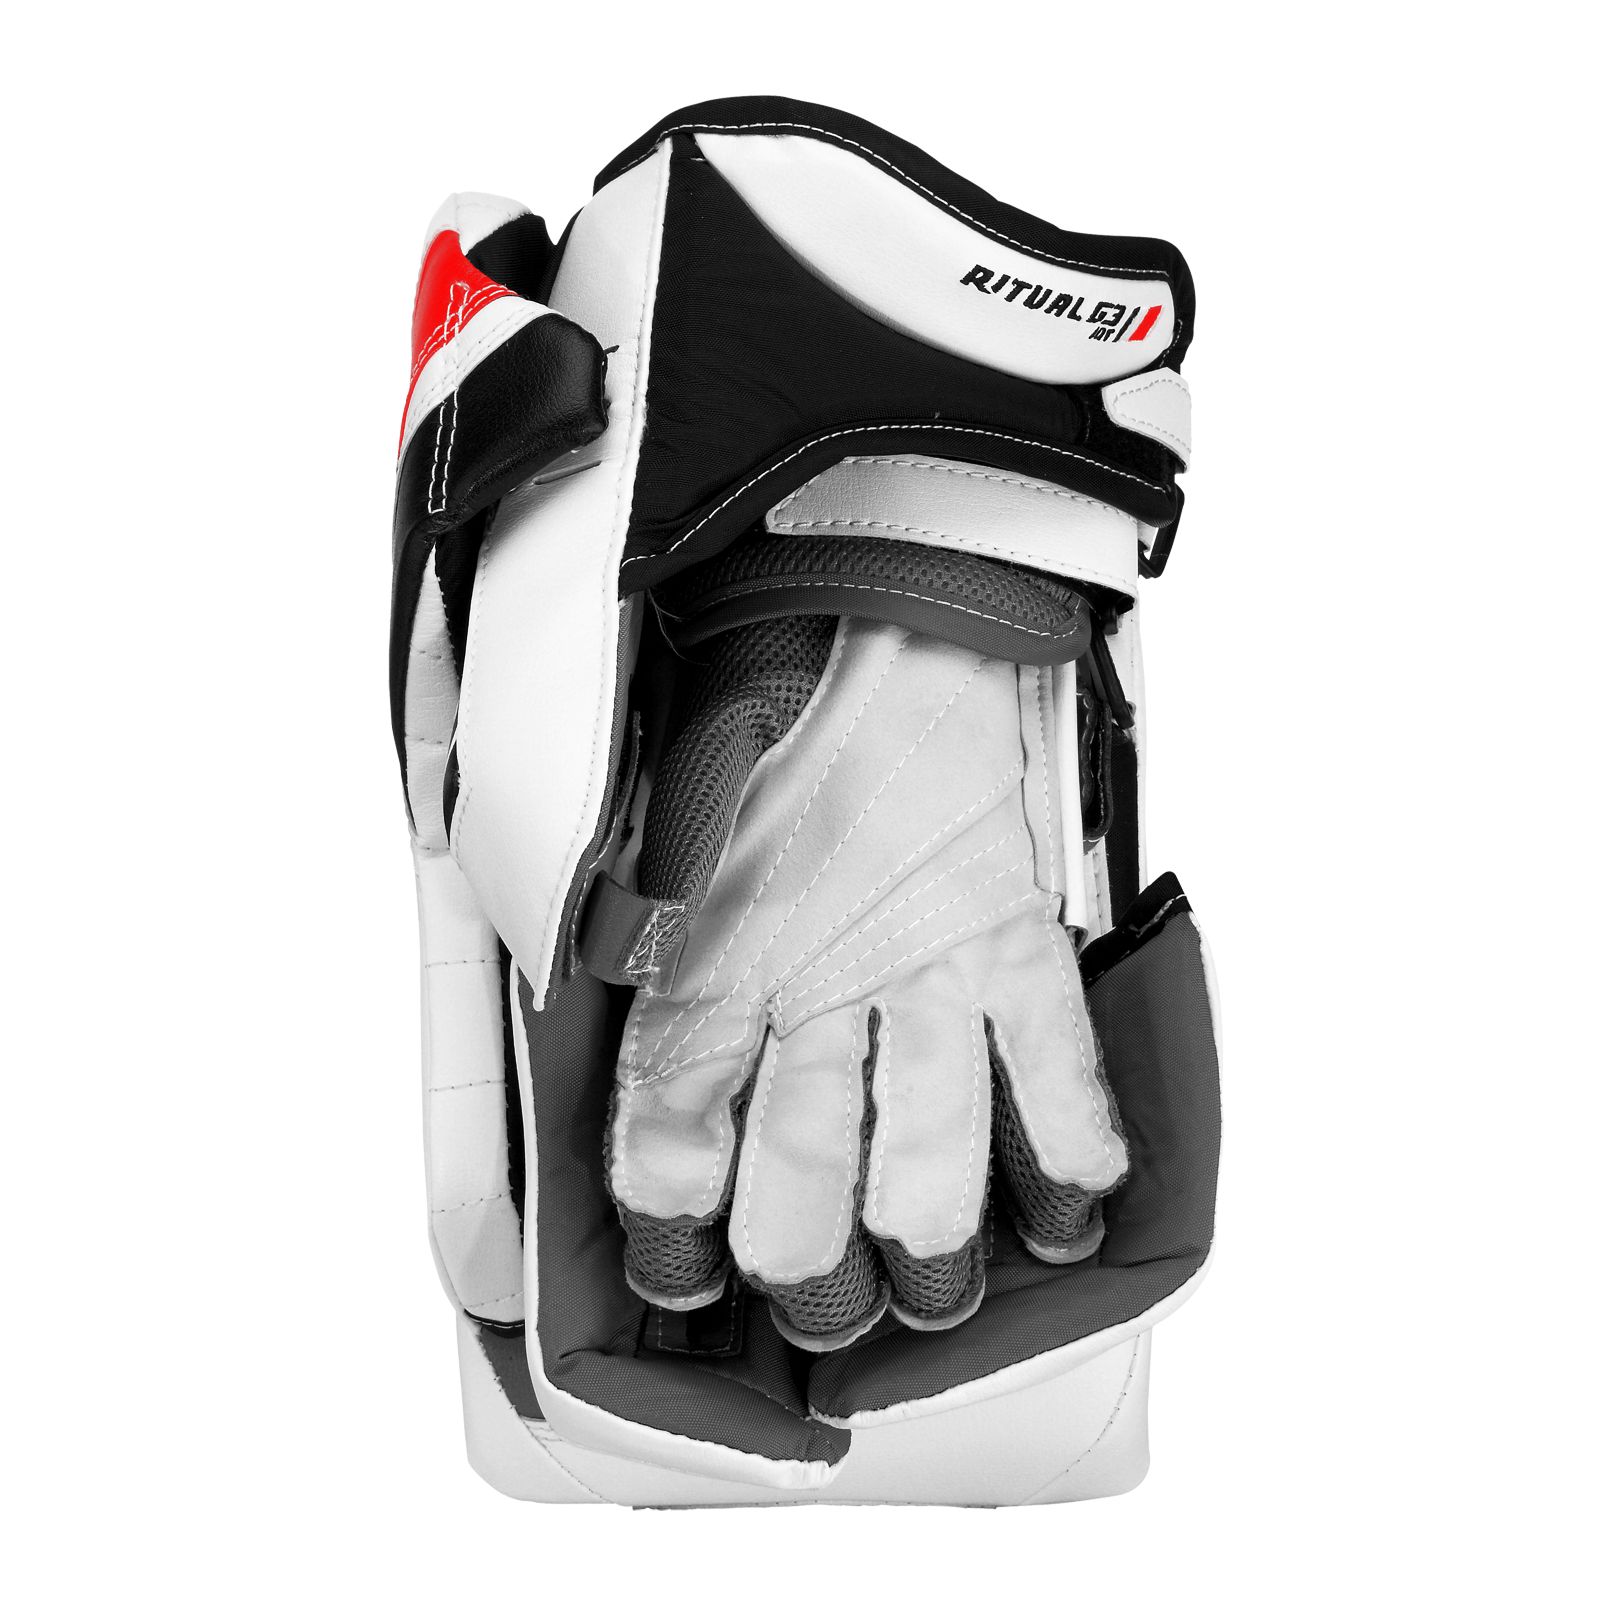 Ritual G3 Int. Blocker, White with Black & Red image number 1